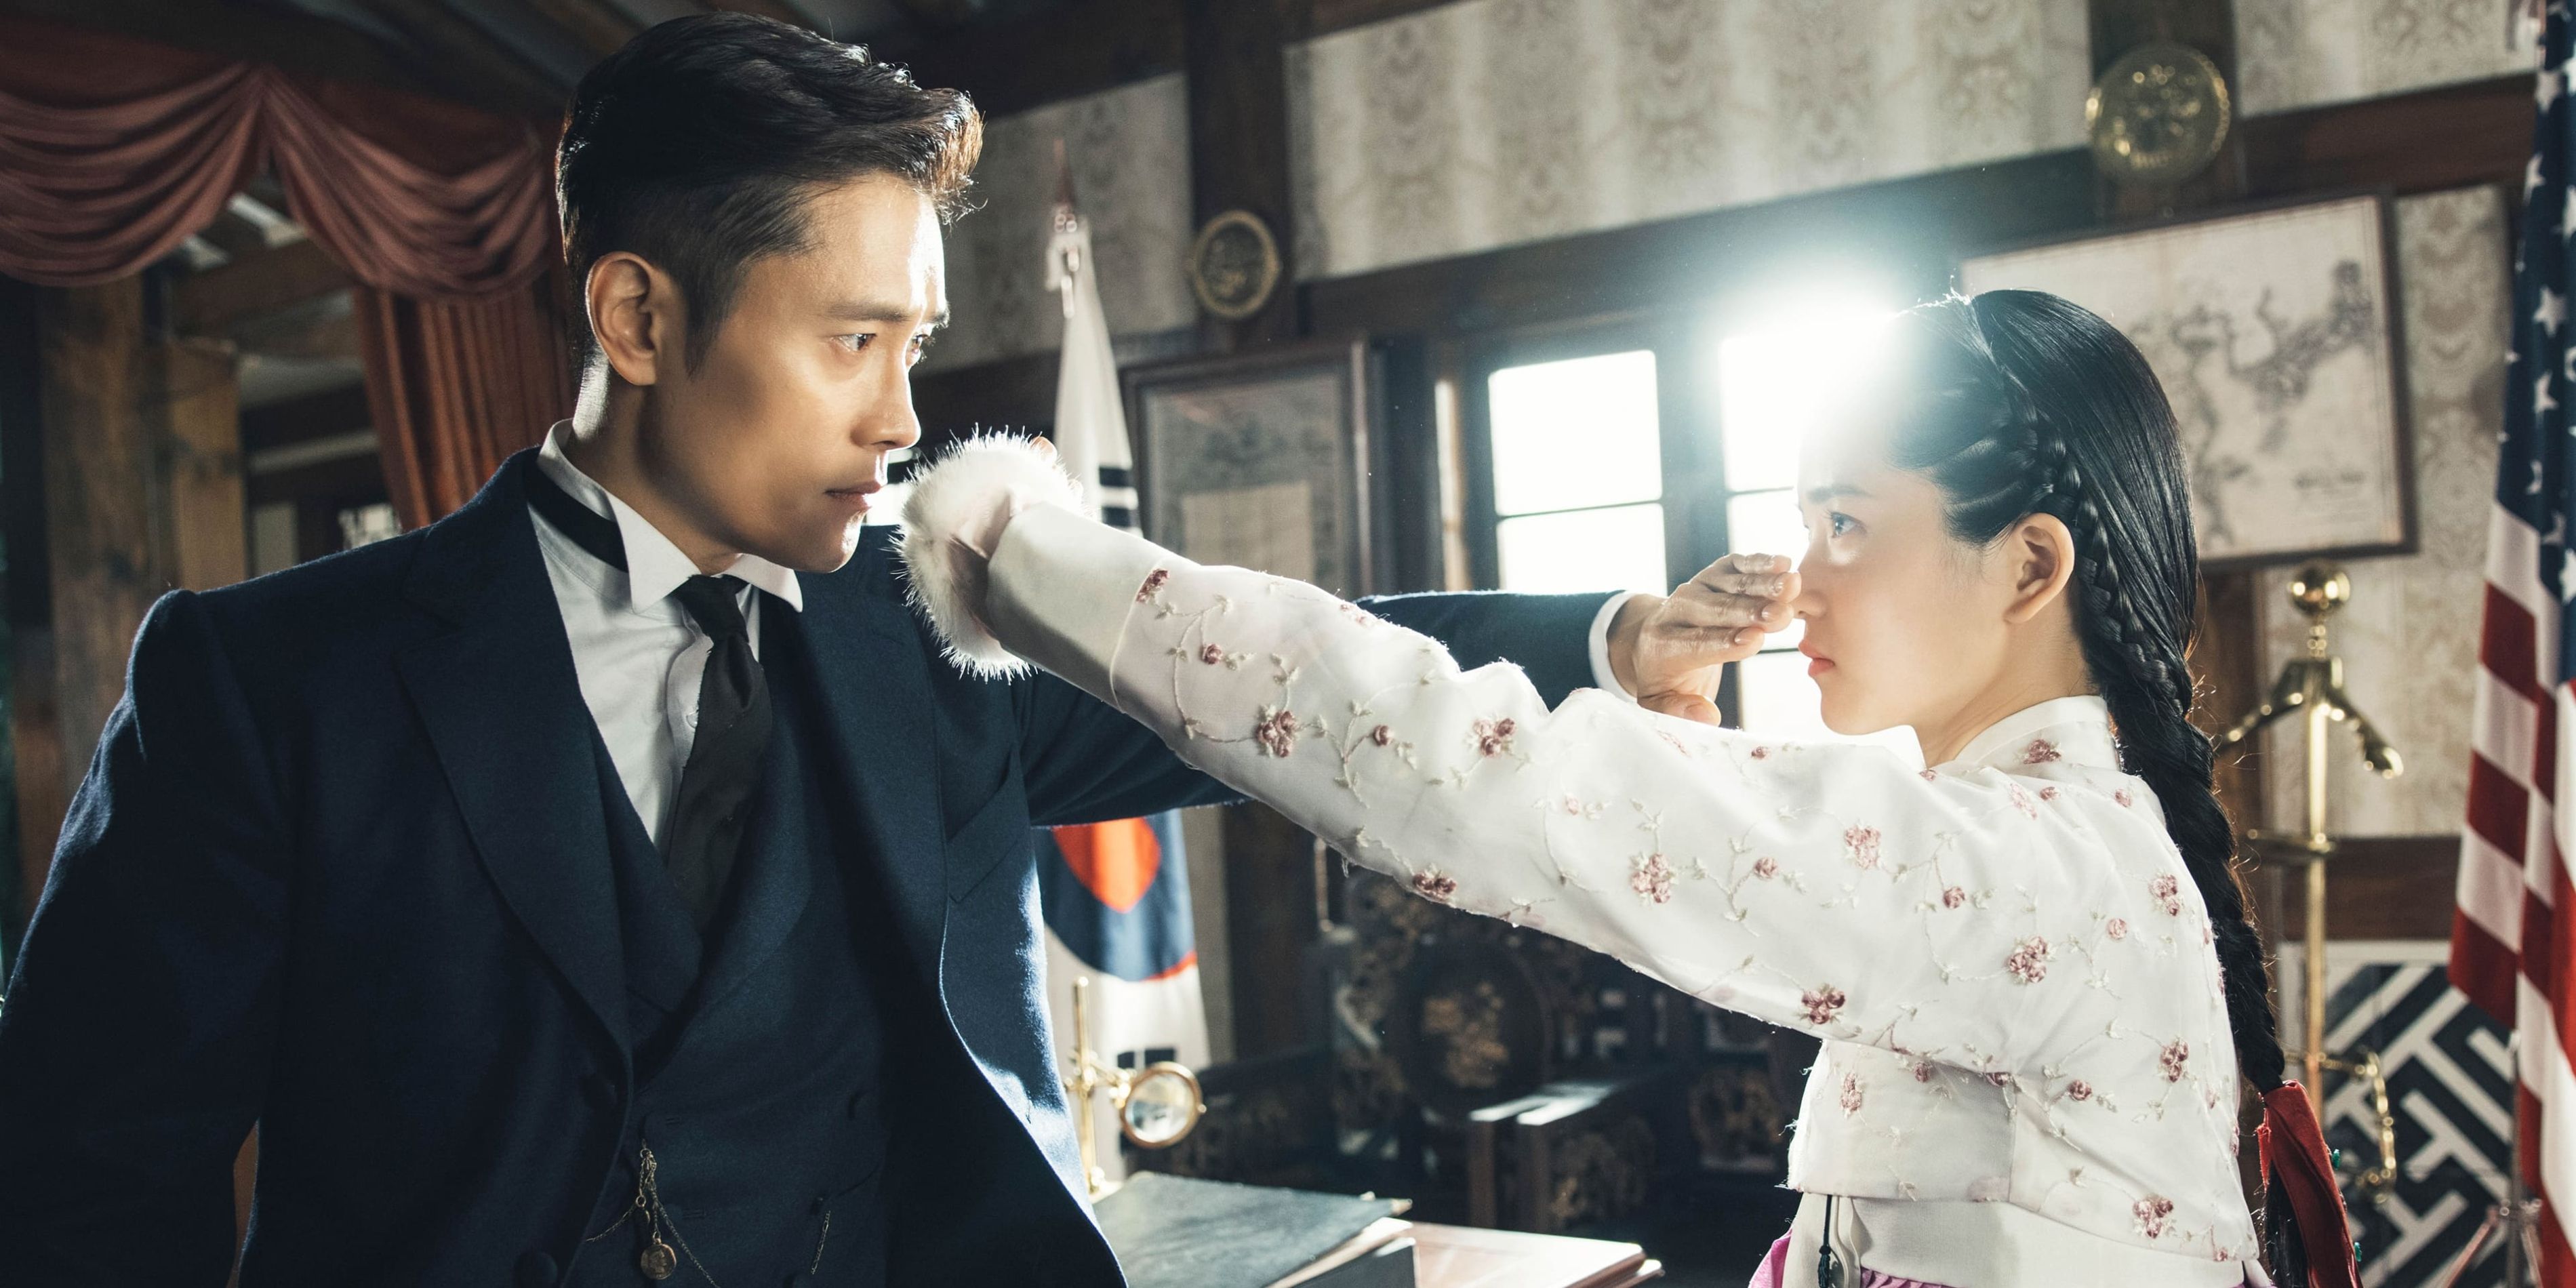 Eugene and Ae-shin, played by Lee Byung-hun and Kim Tae-ri, staring at each other and holding their hands over the lower halves of one another's faces in Mr. Sunshine